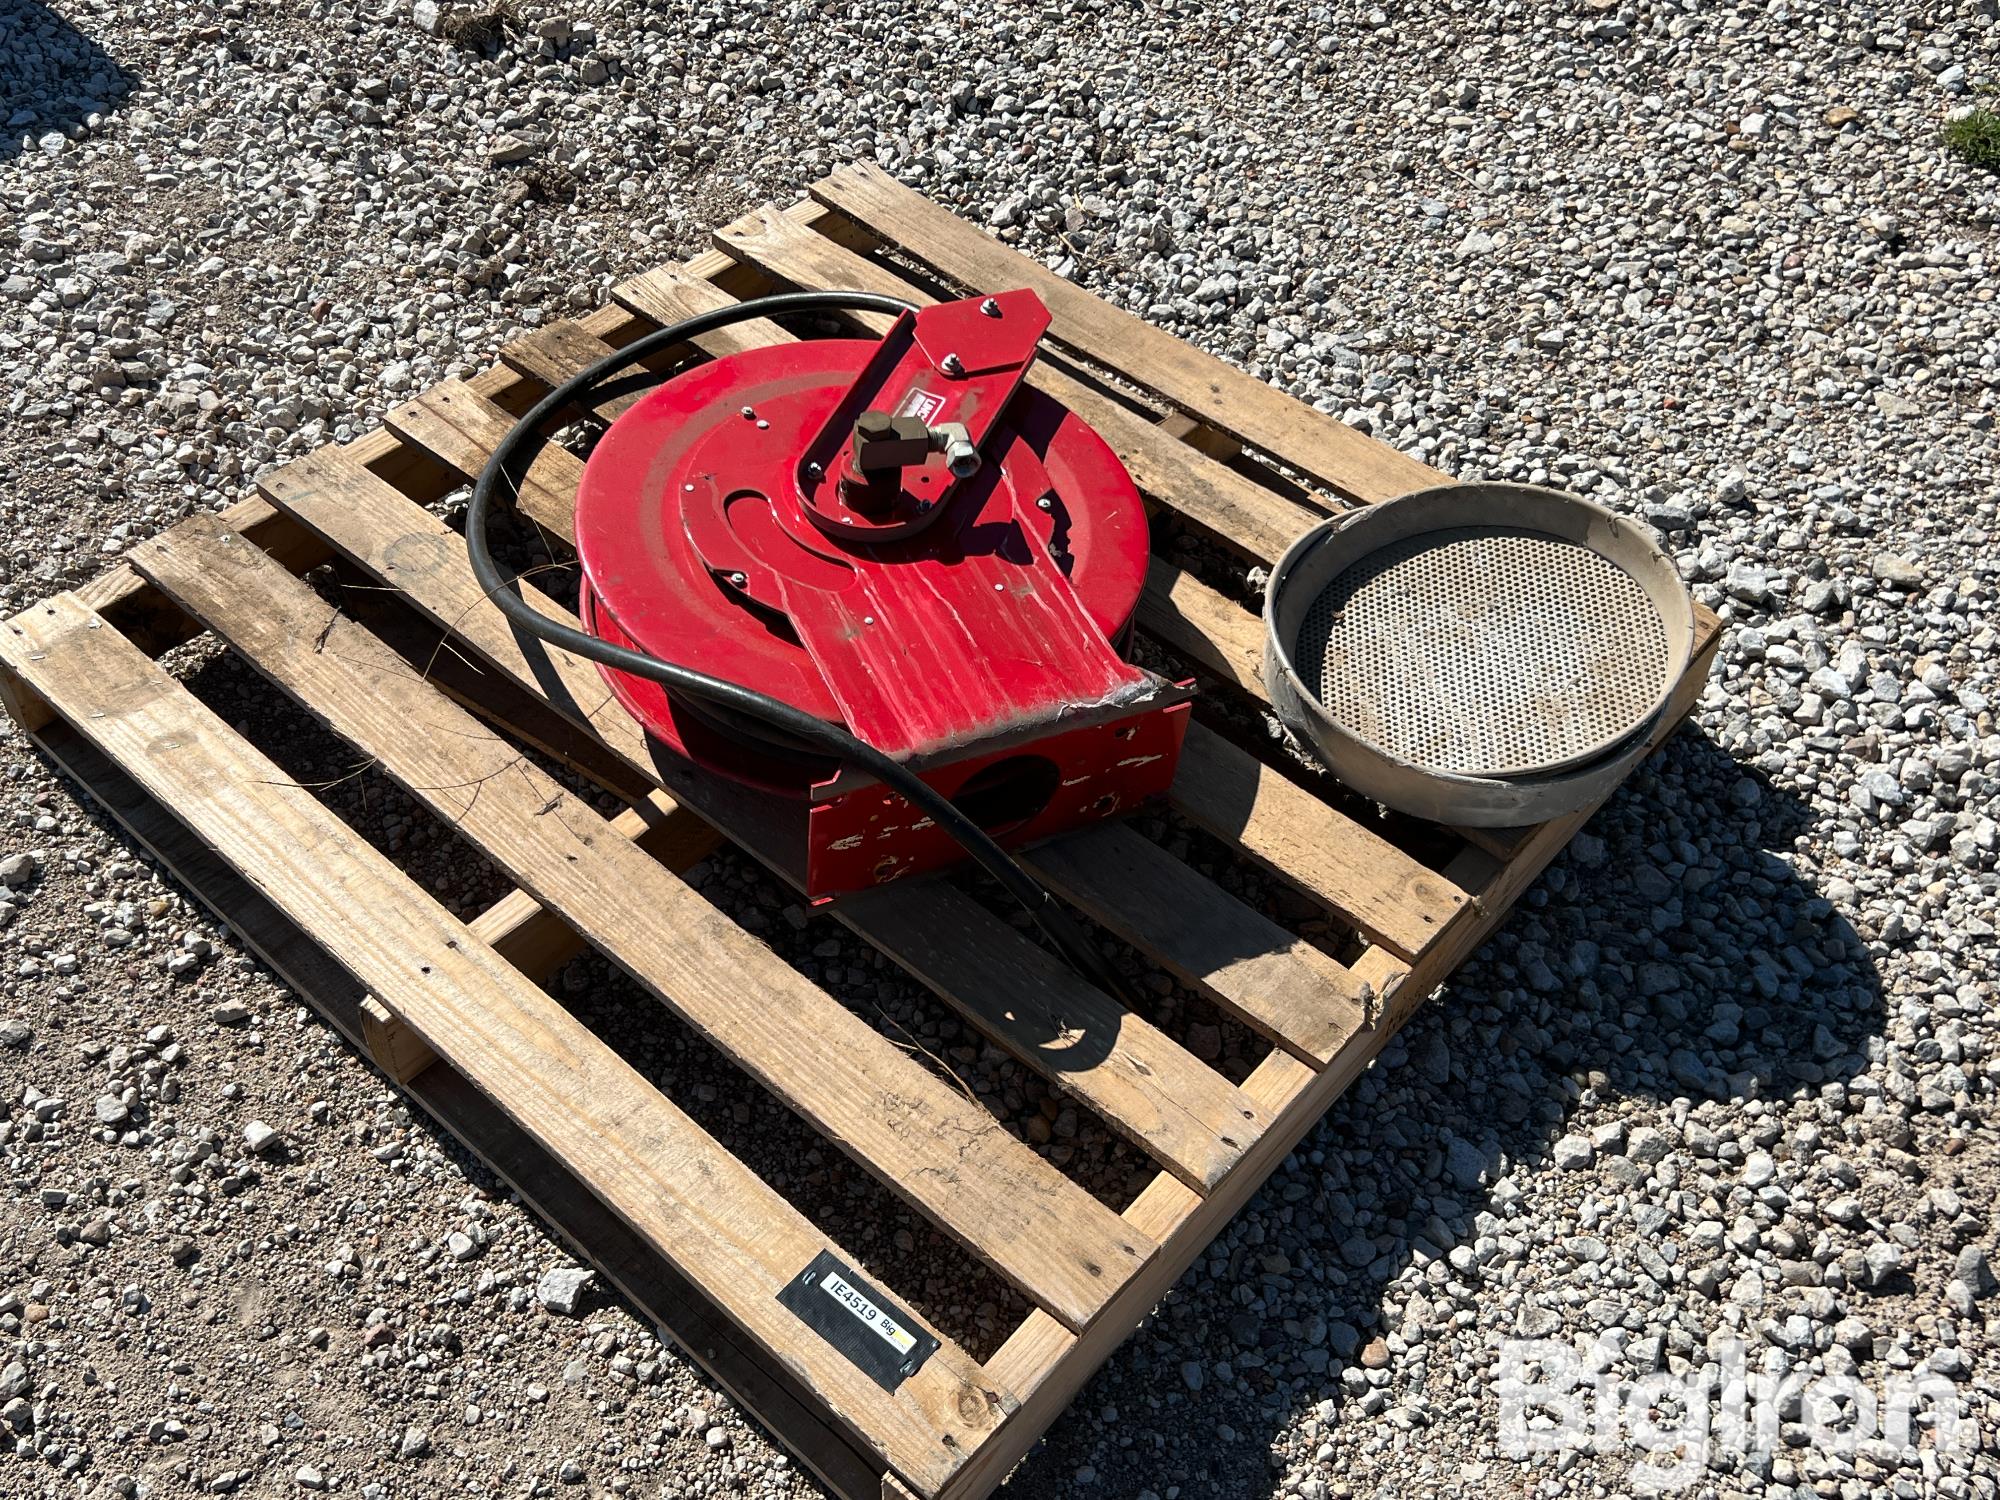 Lincoln Commercial Retracting Air Hose Reel BigIron Auctions